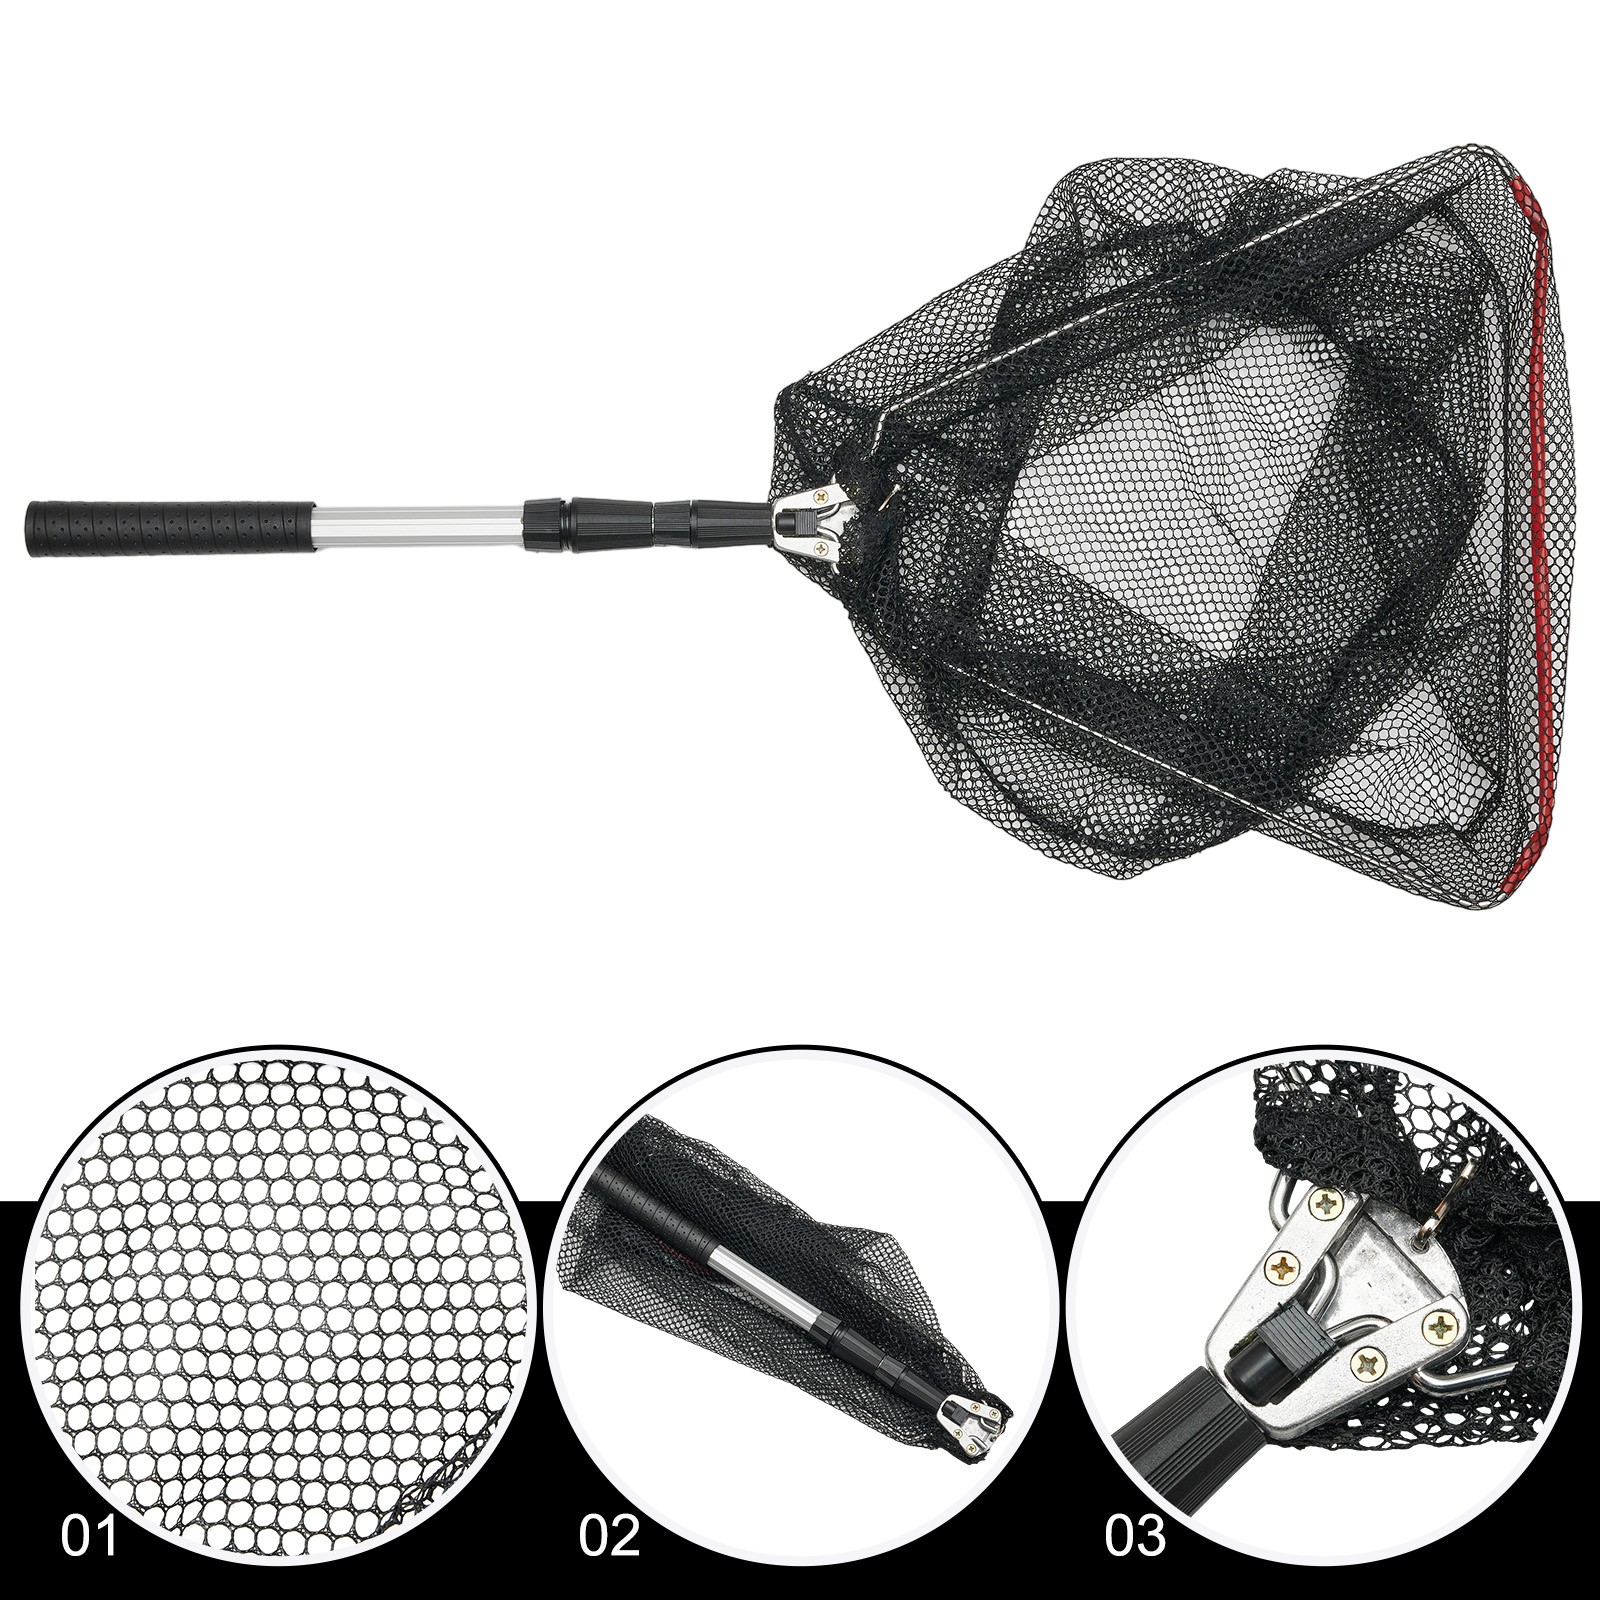 Triangular Nylon Mesh Fishing Nets Fast Unhooking Ideal for Carp and Eel